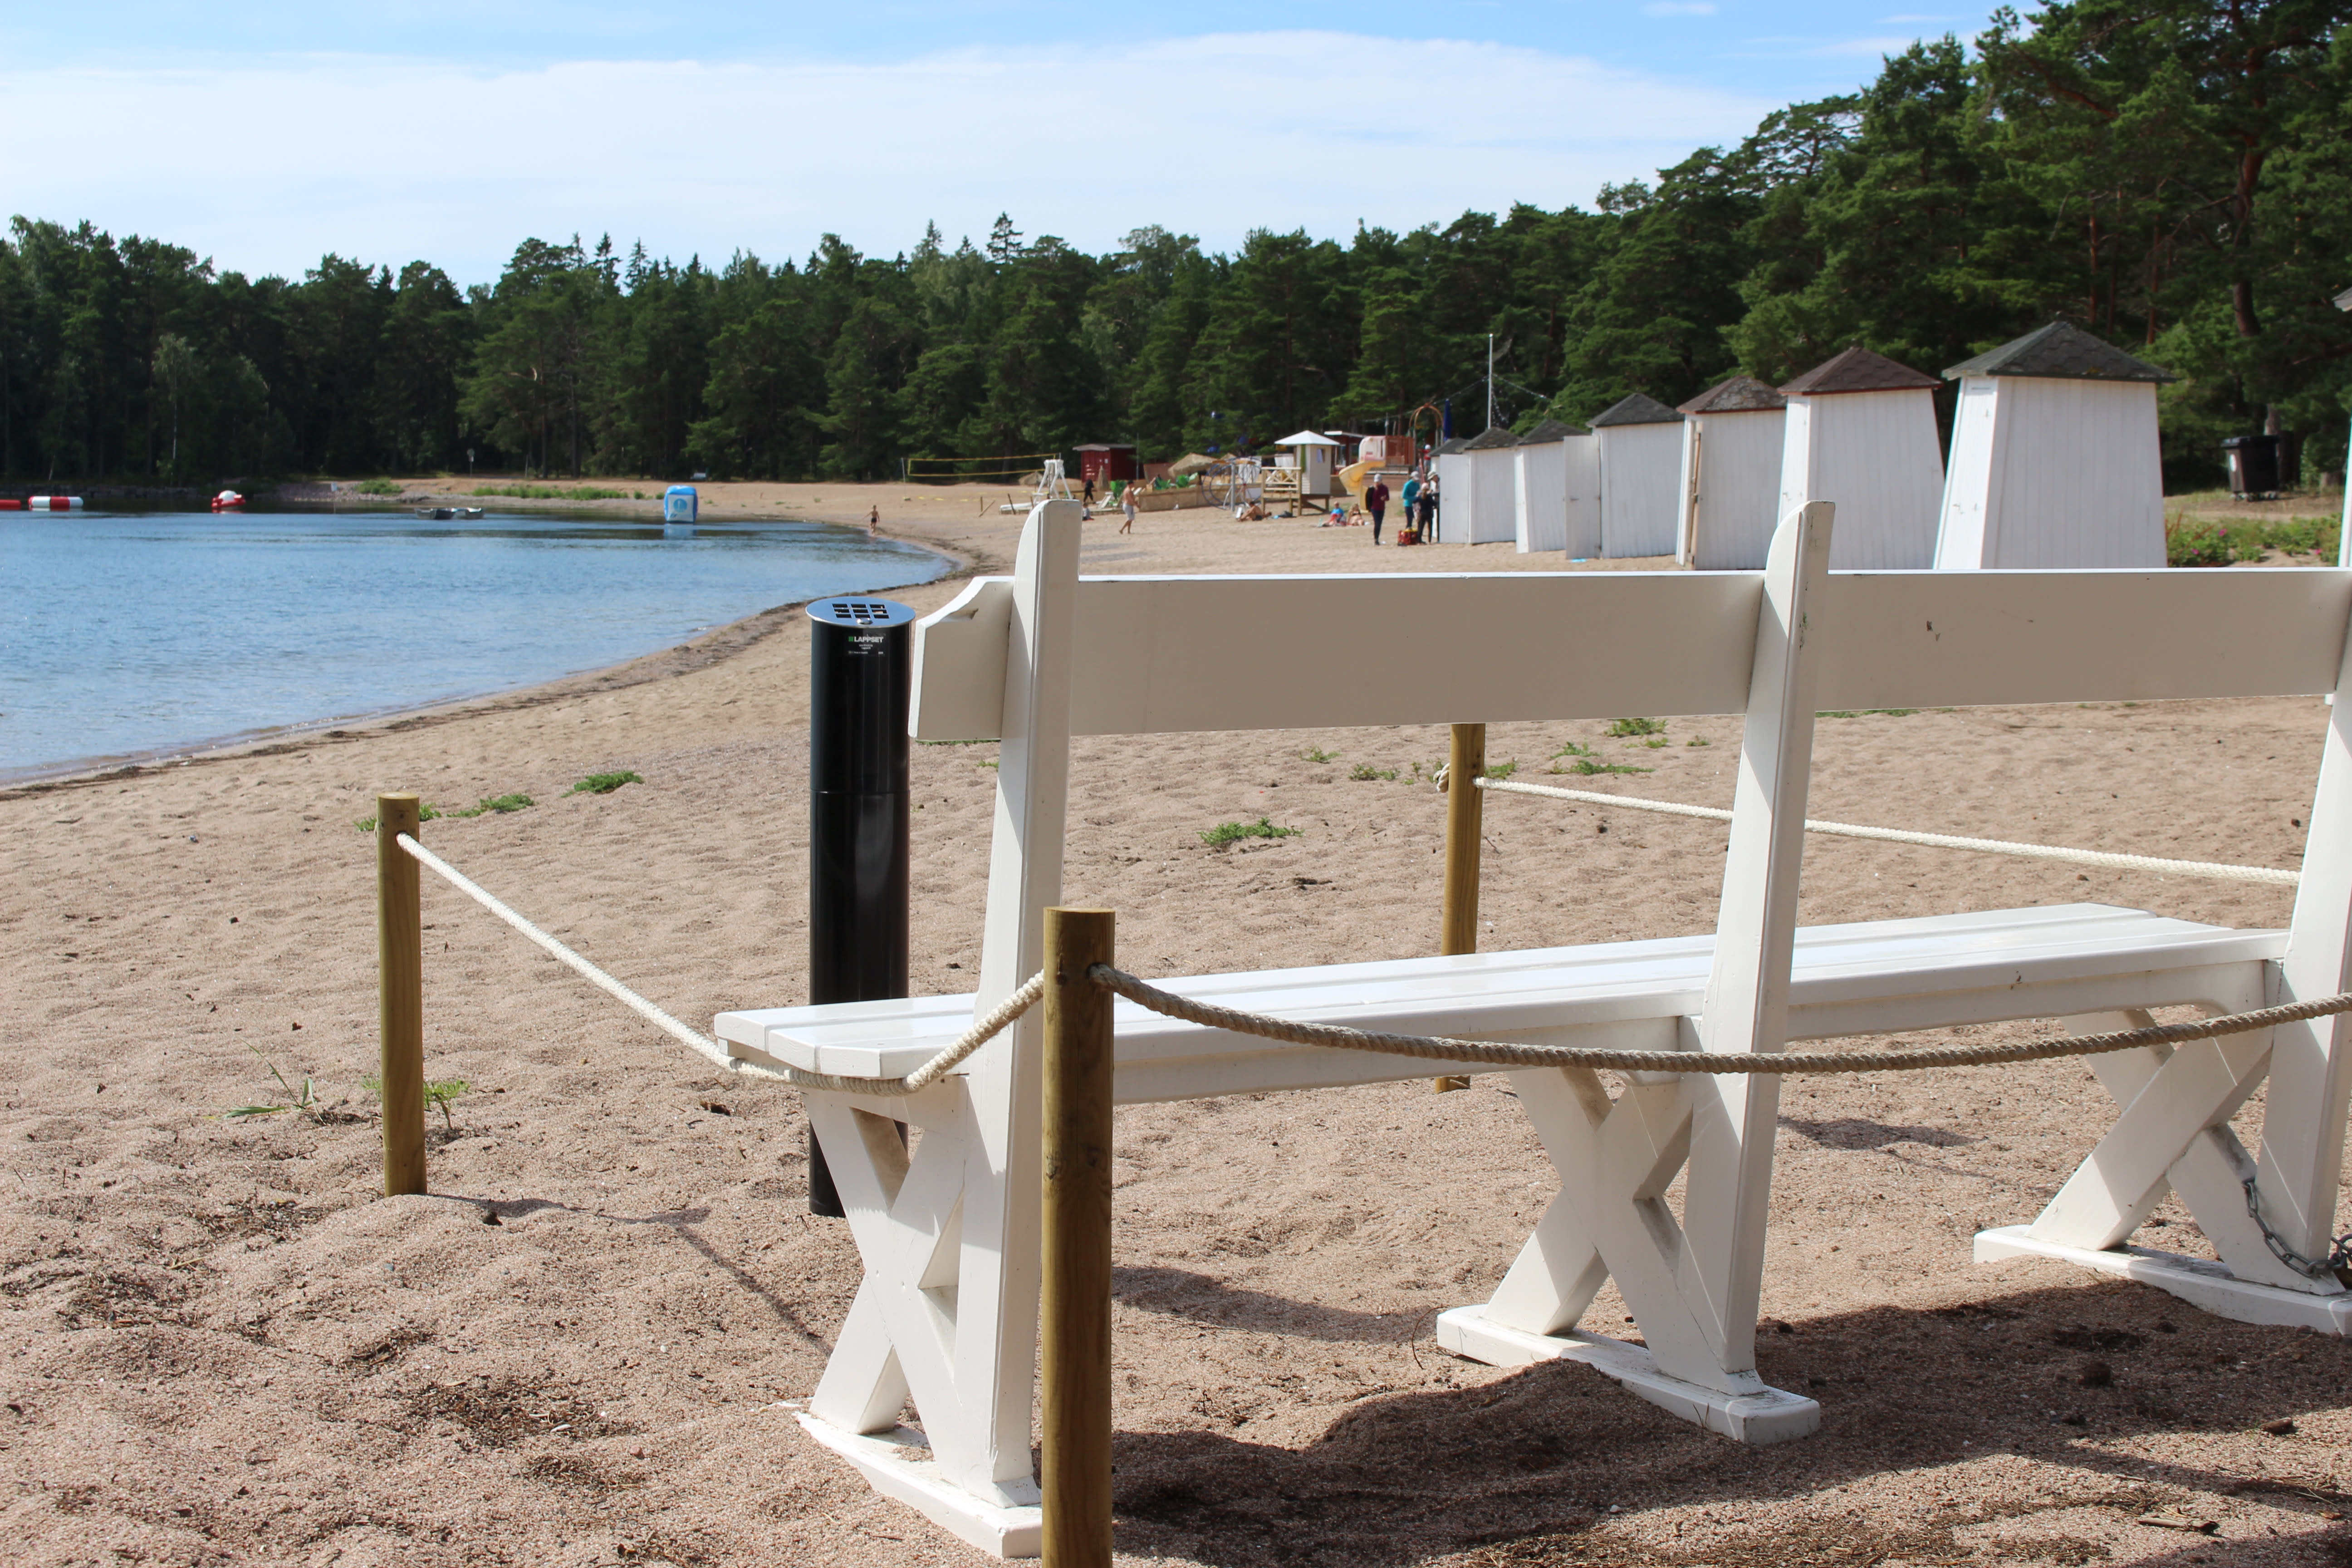 Finland bans smoking on playgrounds and beaches